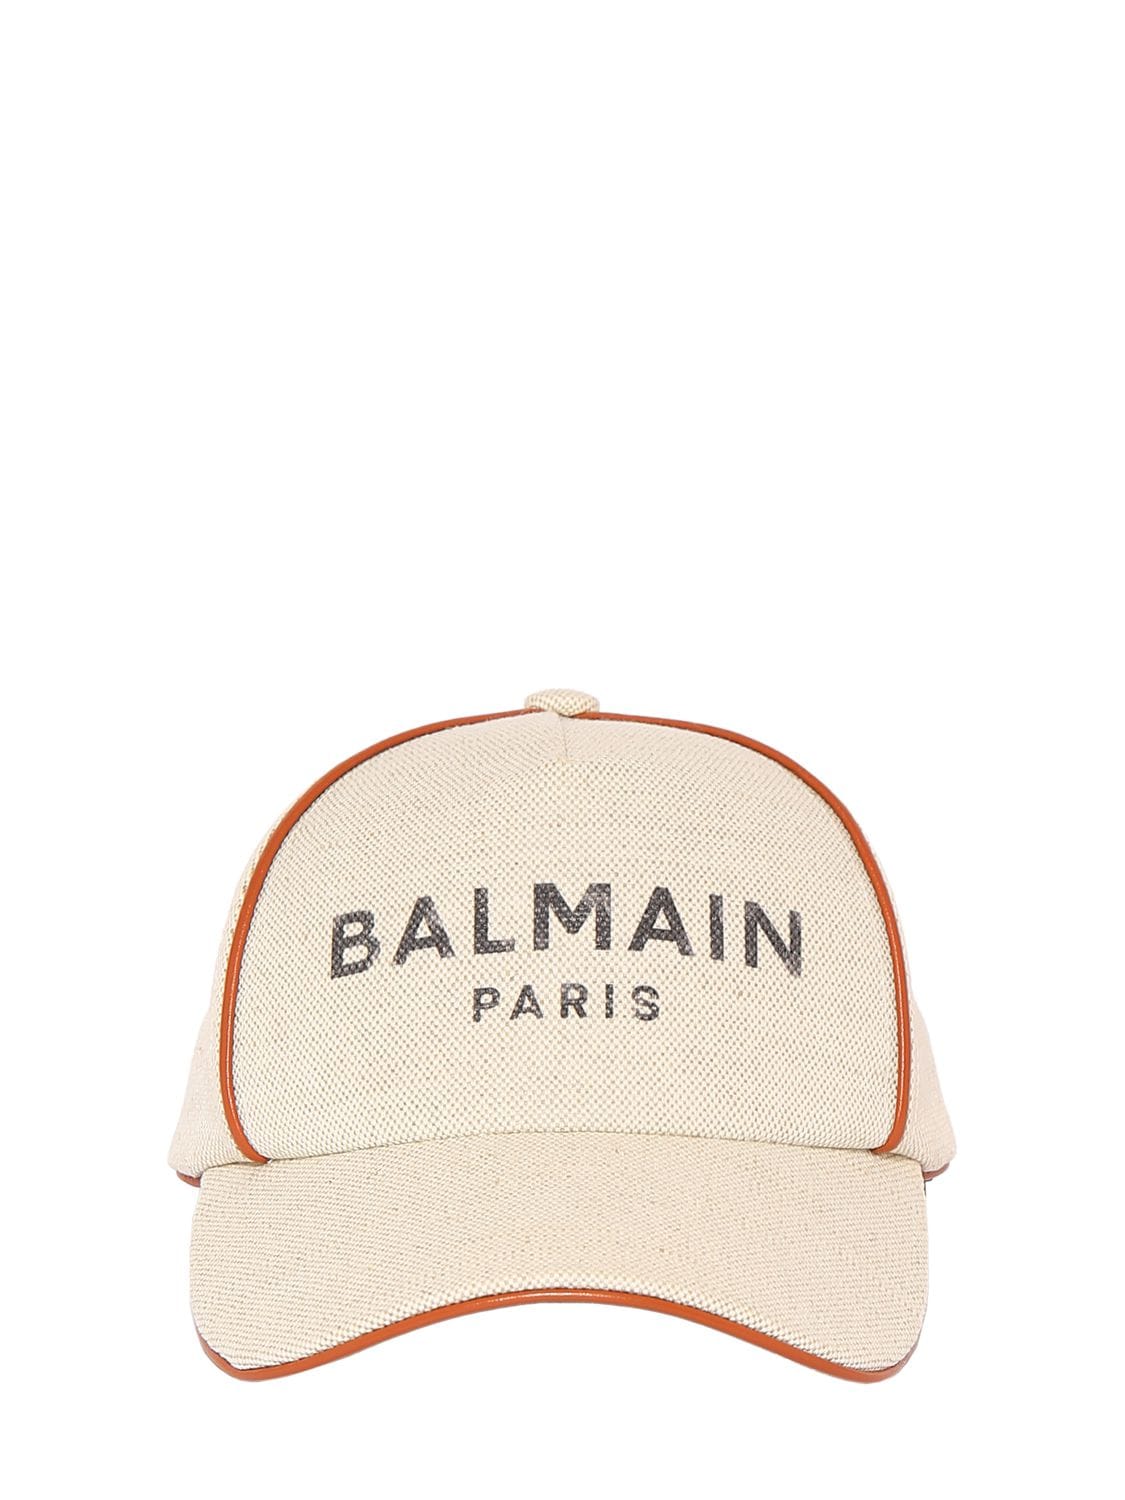 Image of B-army Canvas Cap